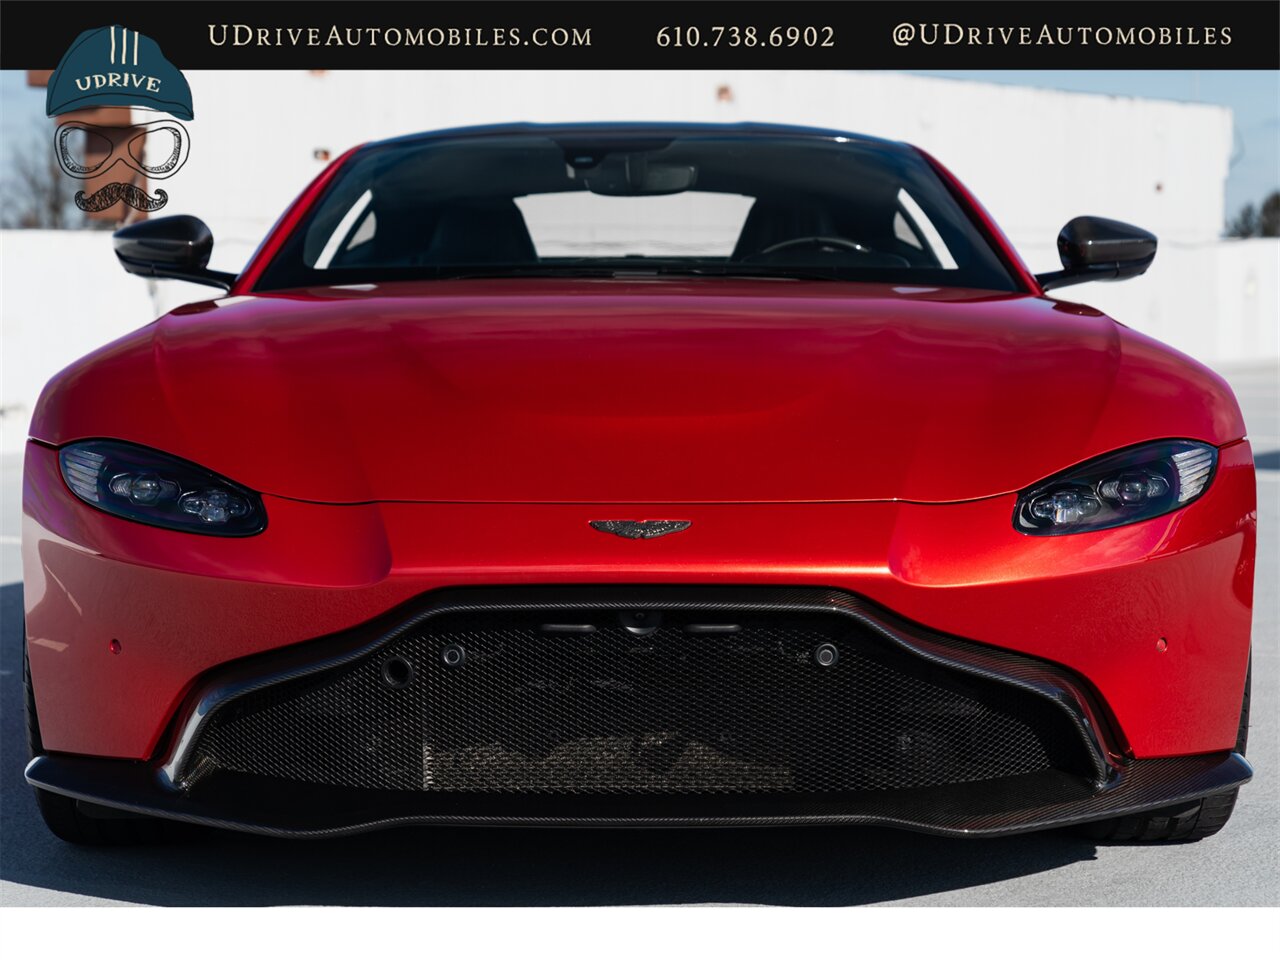 2019 Aston Martin Vantage  Incredibly Spec Rare Q Exclusive Fiamma Red $222k MSRP 1 of a Kind CPO - Photo 14 - West Chester, PA 19382